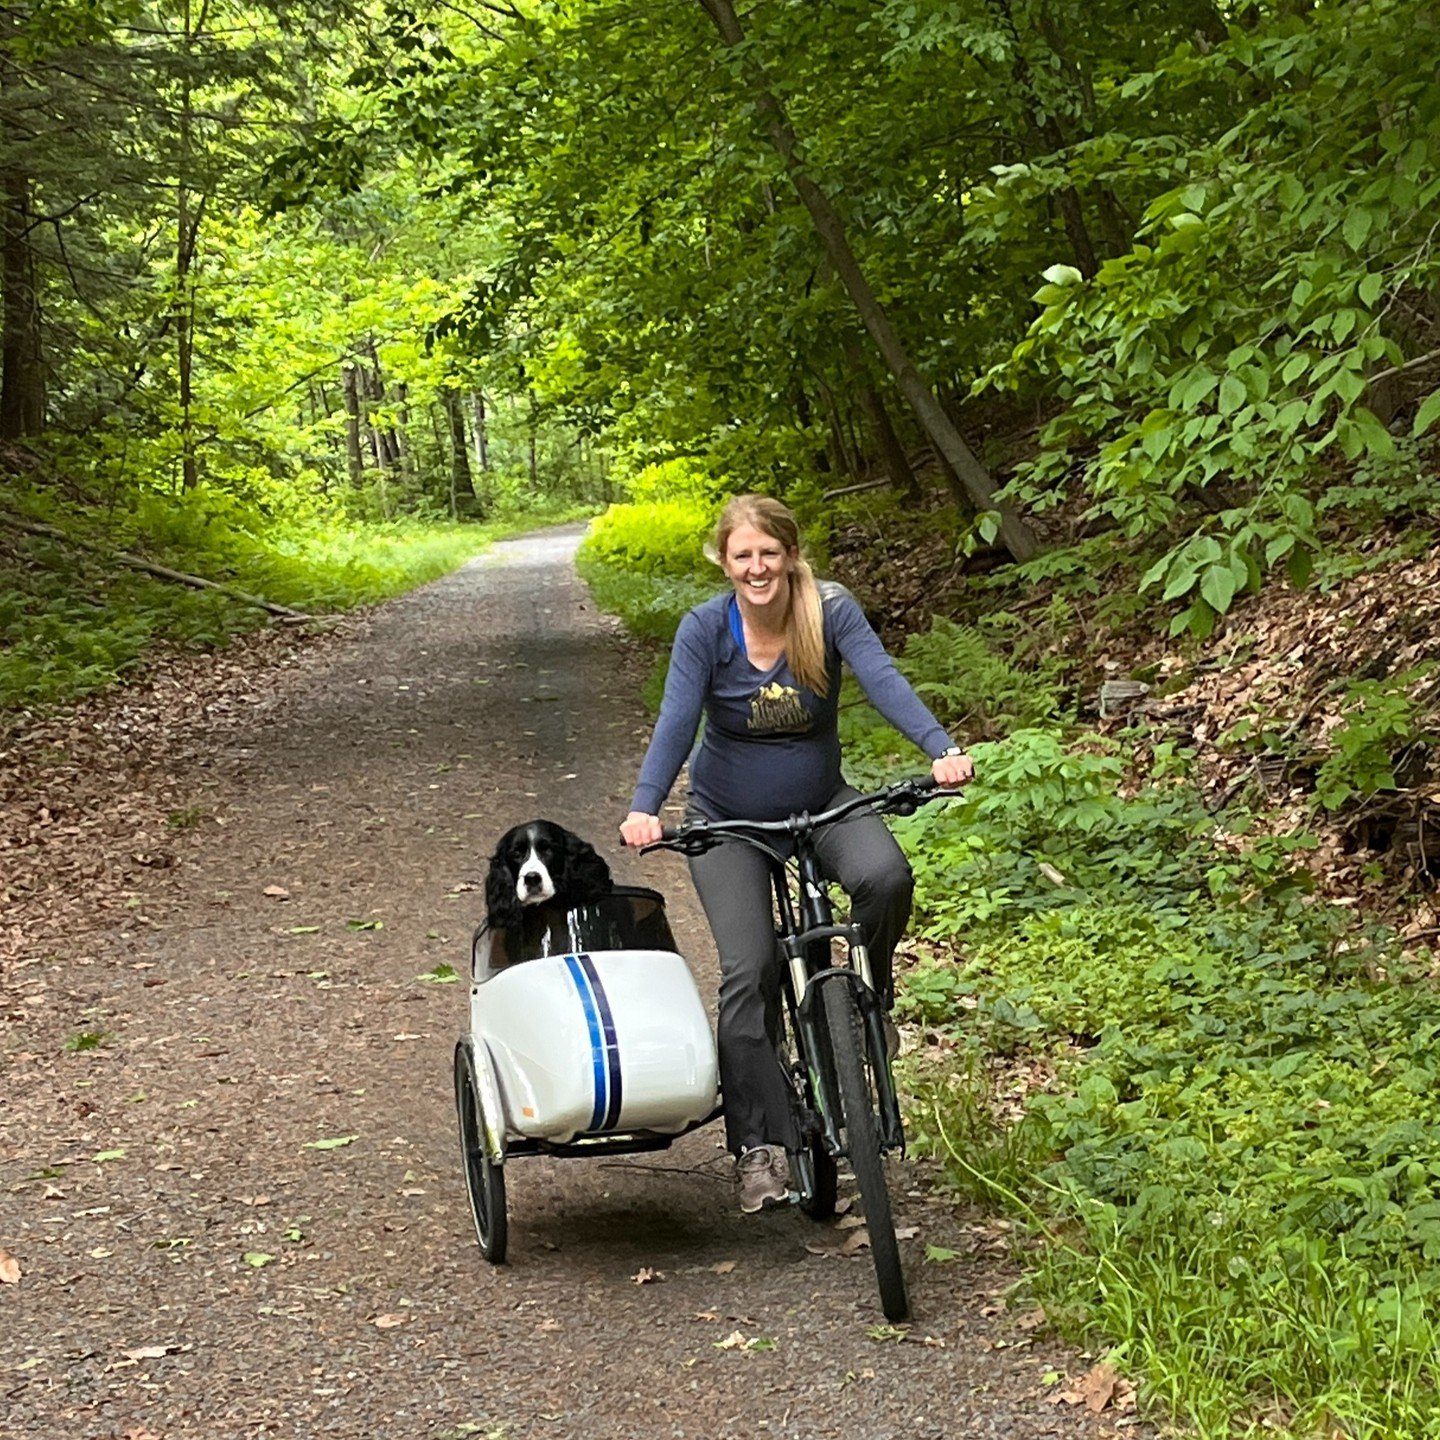 It's summertime! Get out there and enjoy those trails!!

#traildog #sidecar #livingthegoodlife